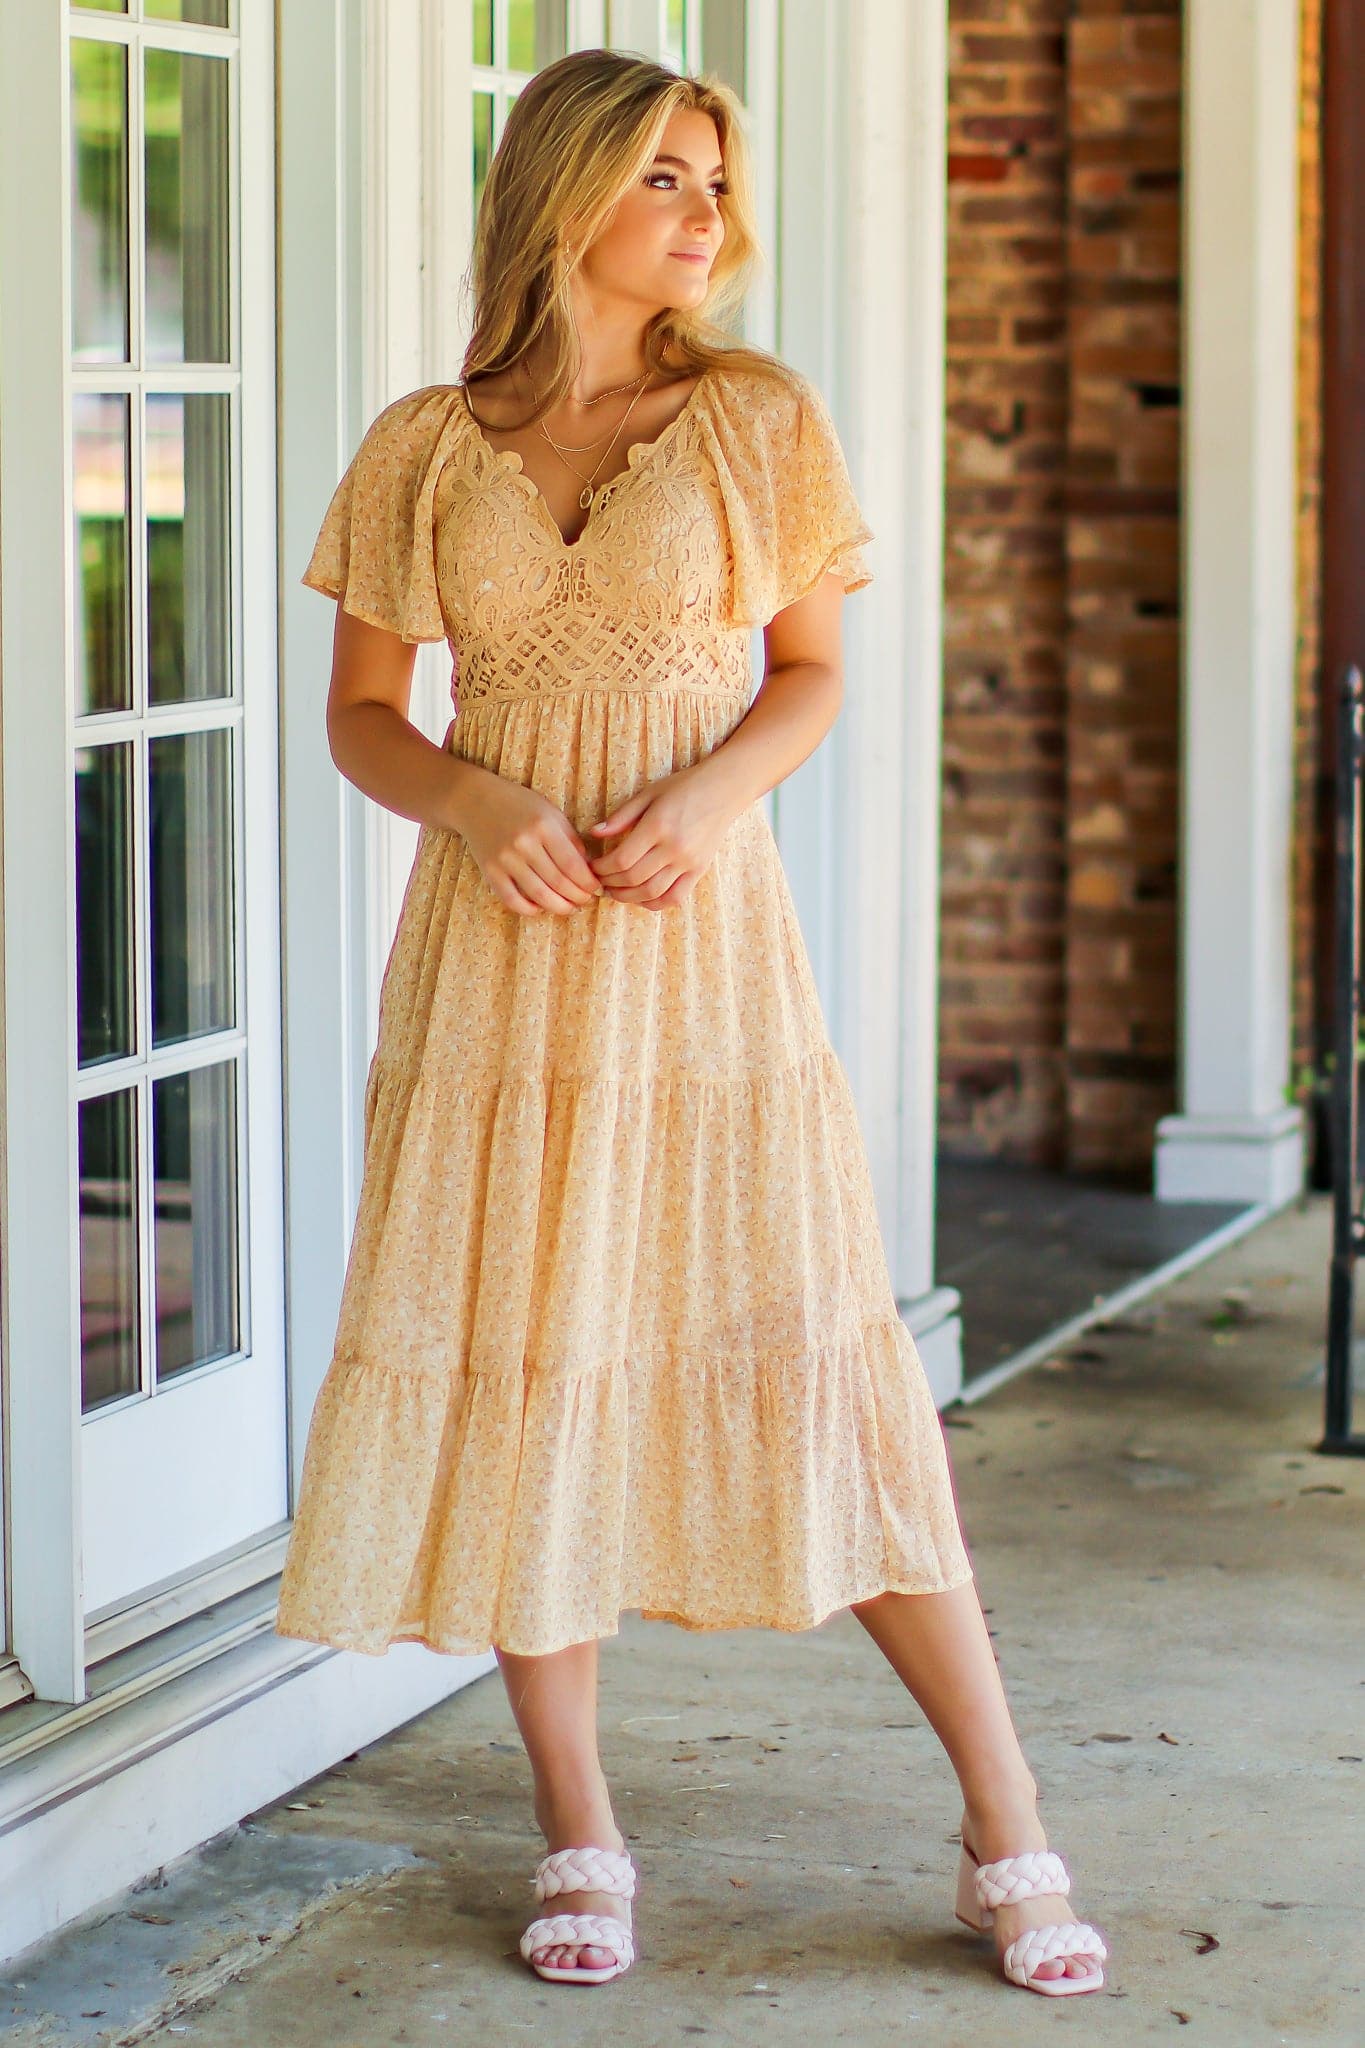  Wishful Dreams Crochet Lace Floral Dress - FINAL SALE - Madison and Mallory